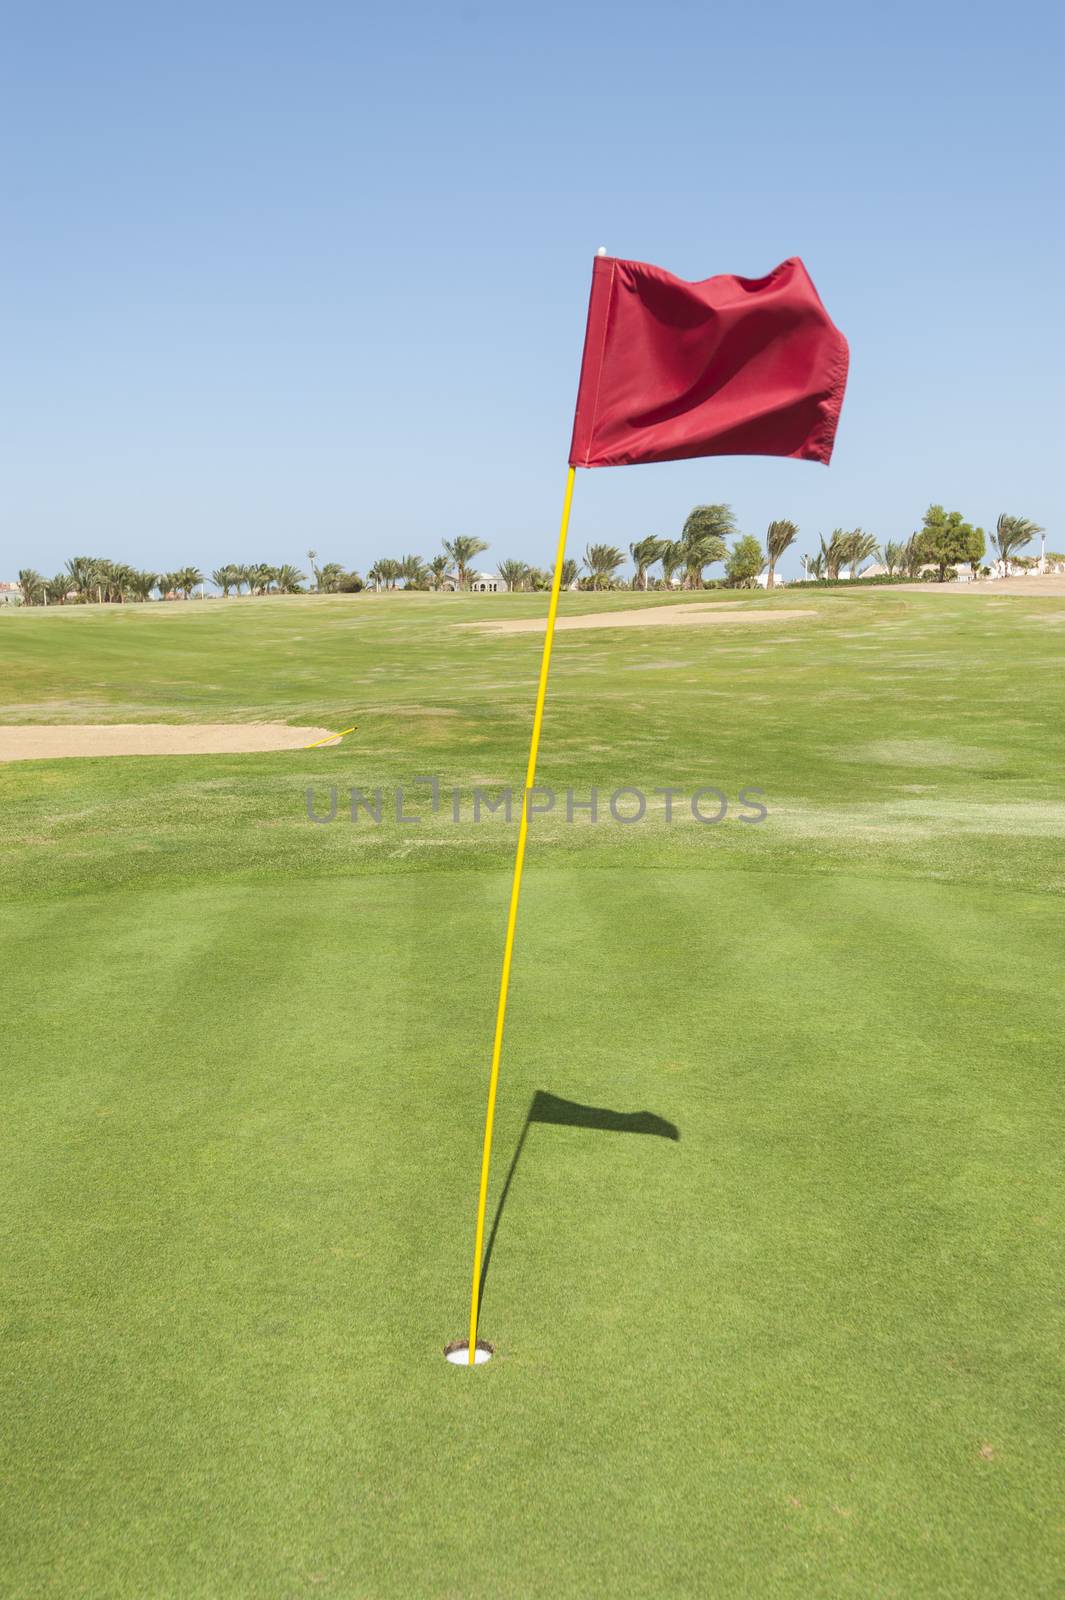 Flag in the hole on a golf course green